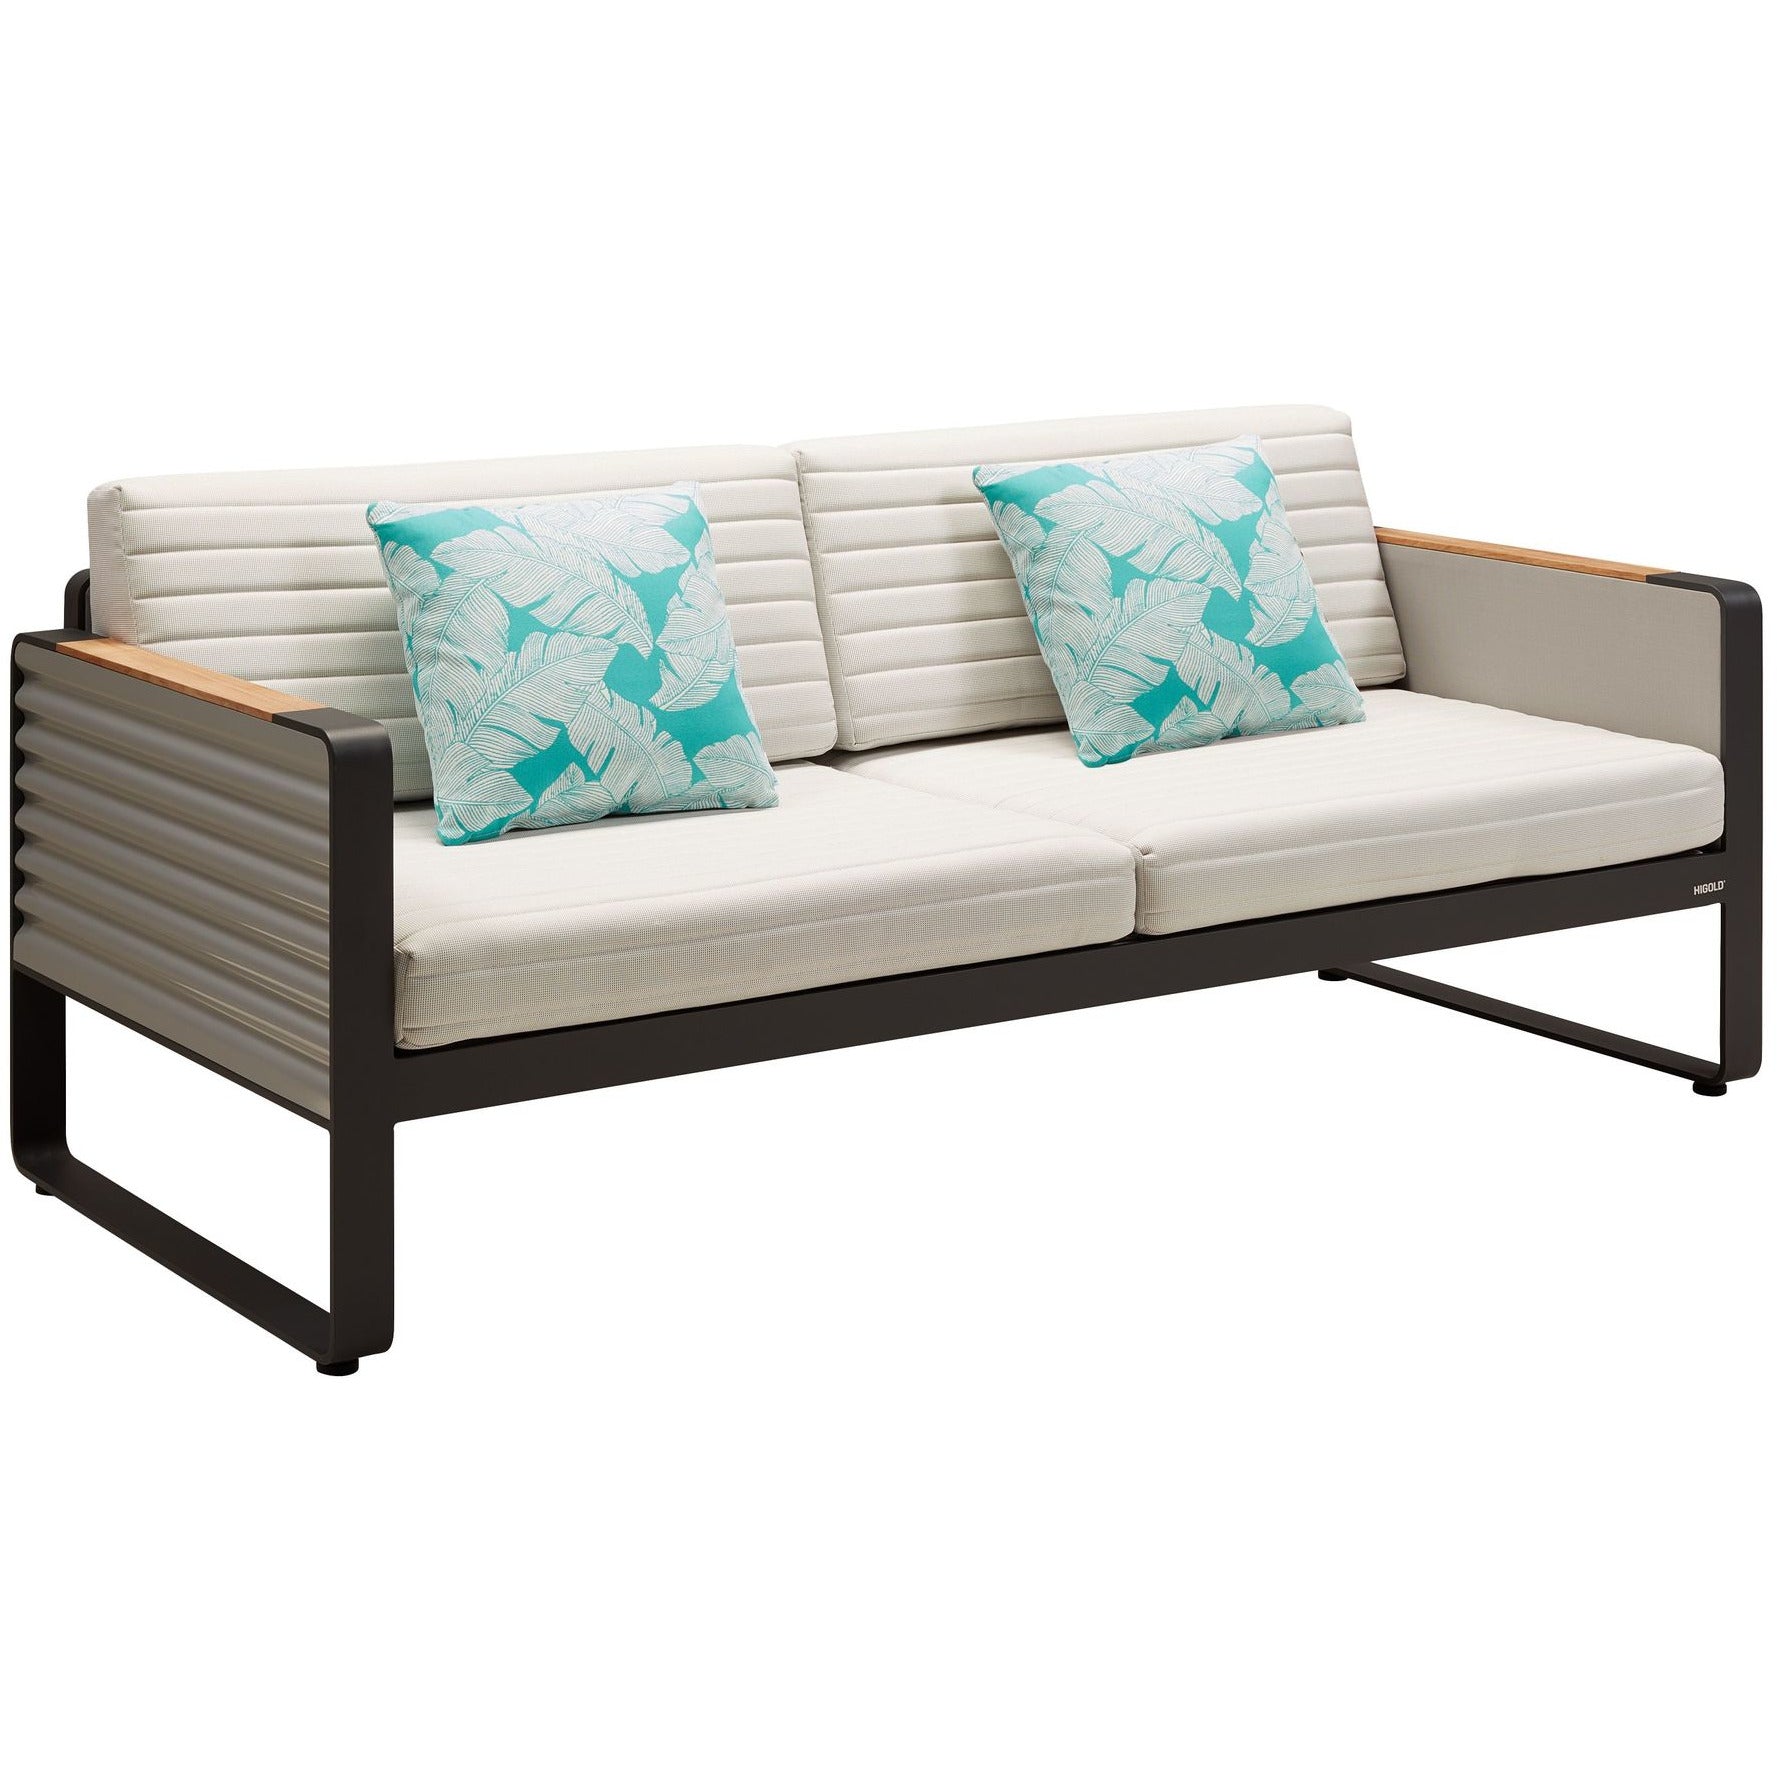 Airport 2 Seat Sofa, Coffee & Side Table Set - PadioLiving - Airport 2 Seat Sofa, Coffee & Side Table Set - Outdoor Sofa and Coffee Table Set - PadioLiving